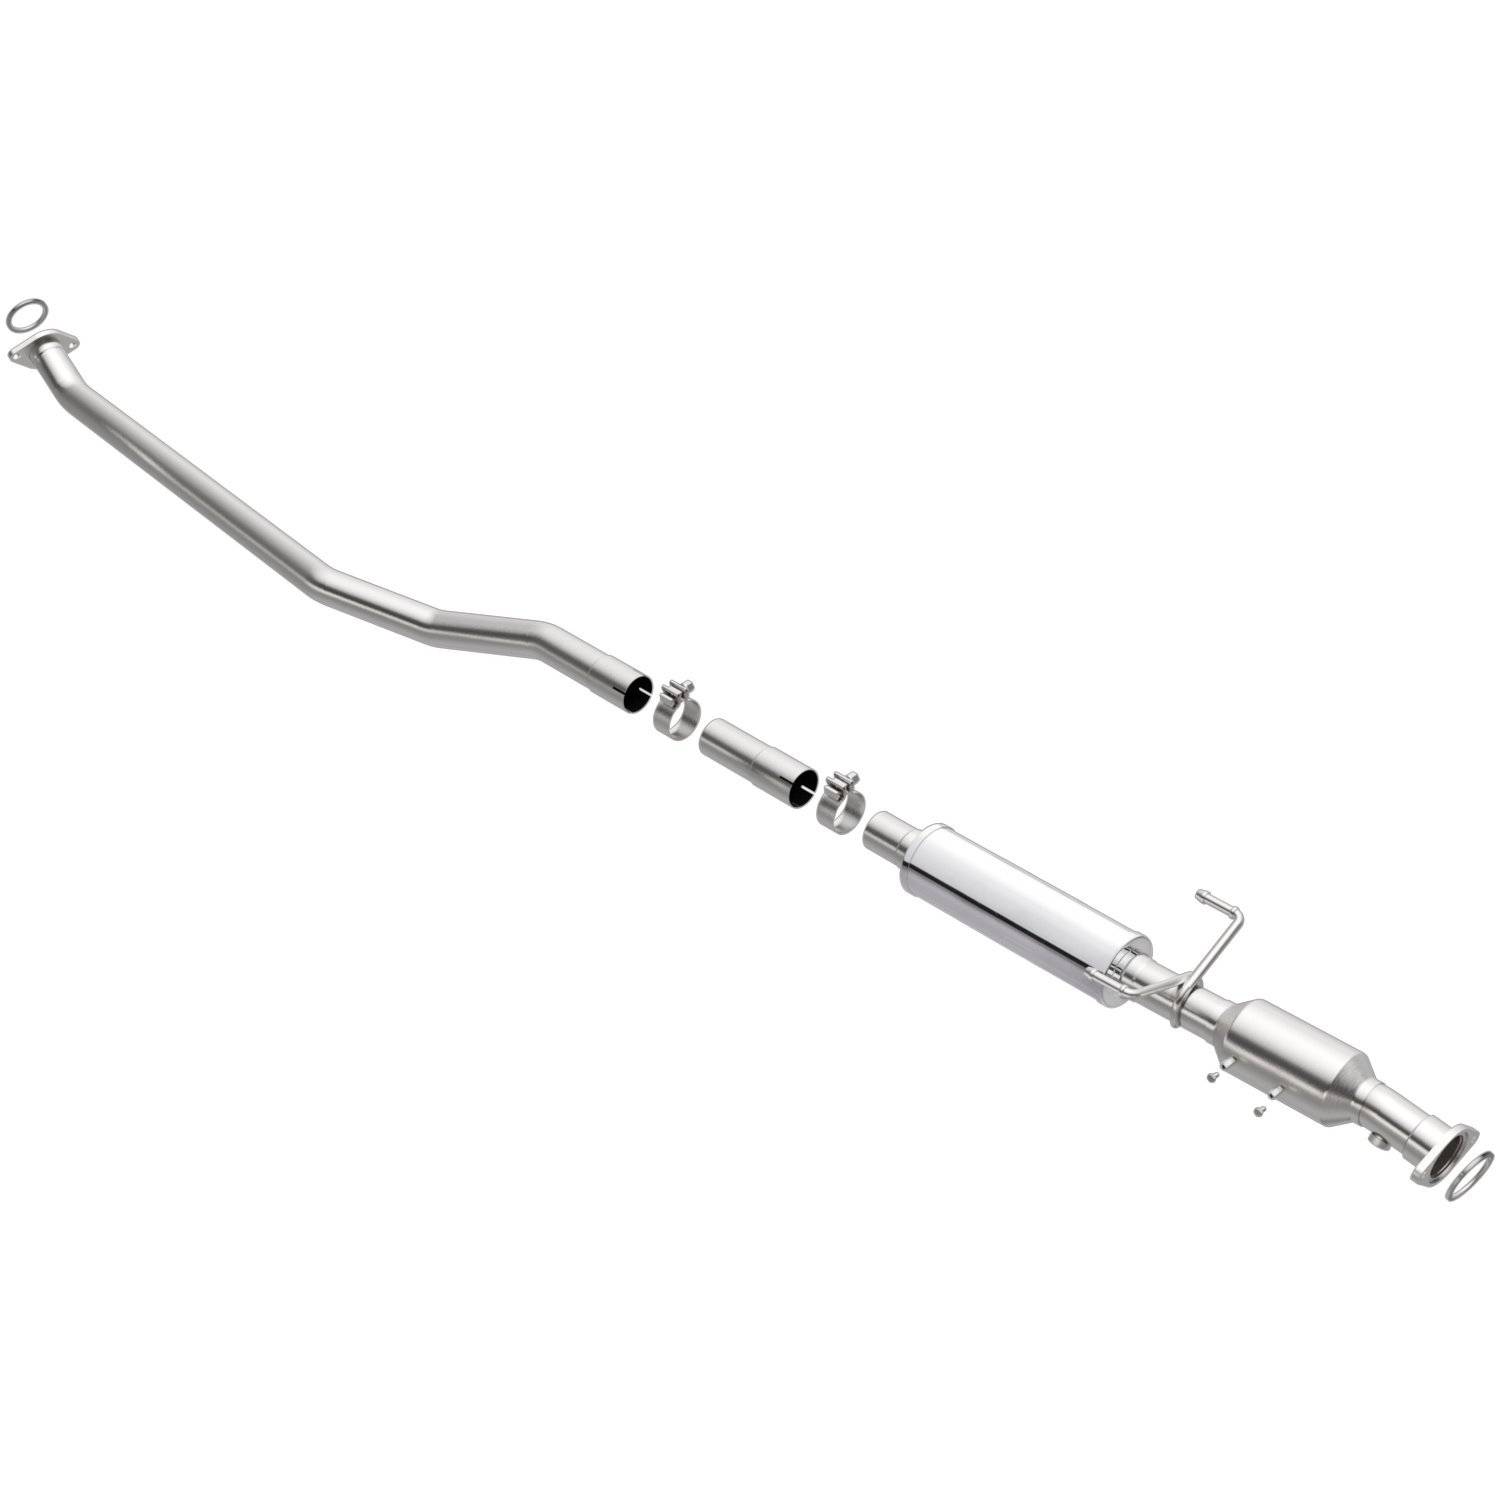 OEM Grade Federal / EPA Compliant Direct-Fit Catalytic Converter 21-326